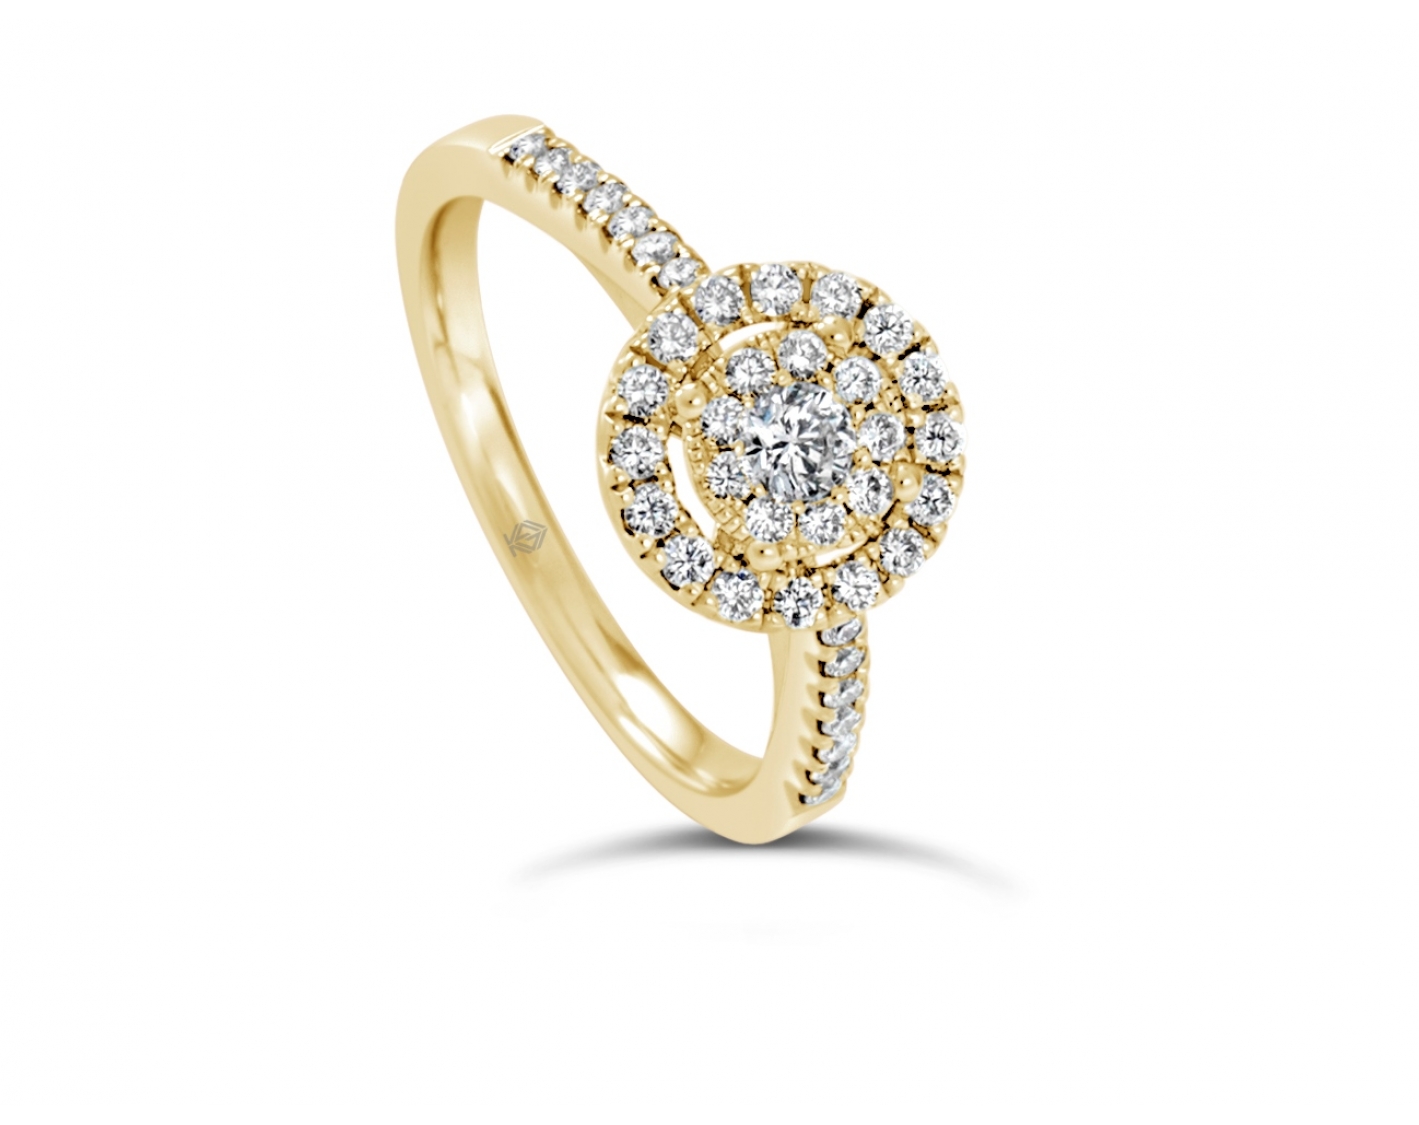 18k yellow gold halo illusion set engagement ring with pave set sidestones Photos & images